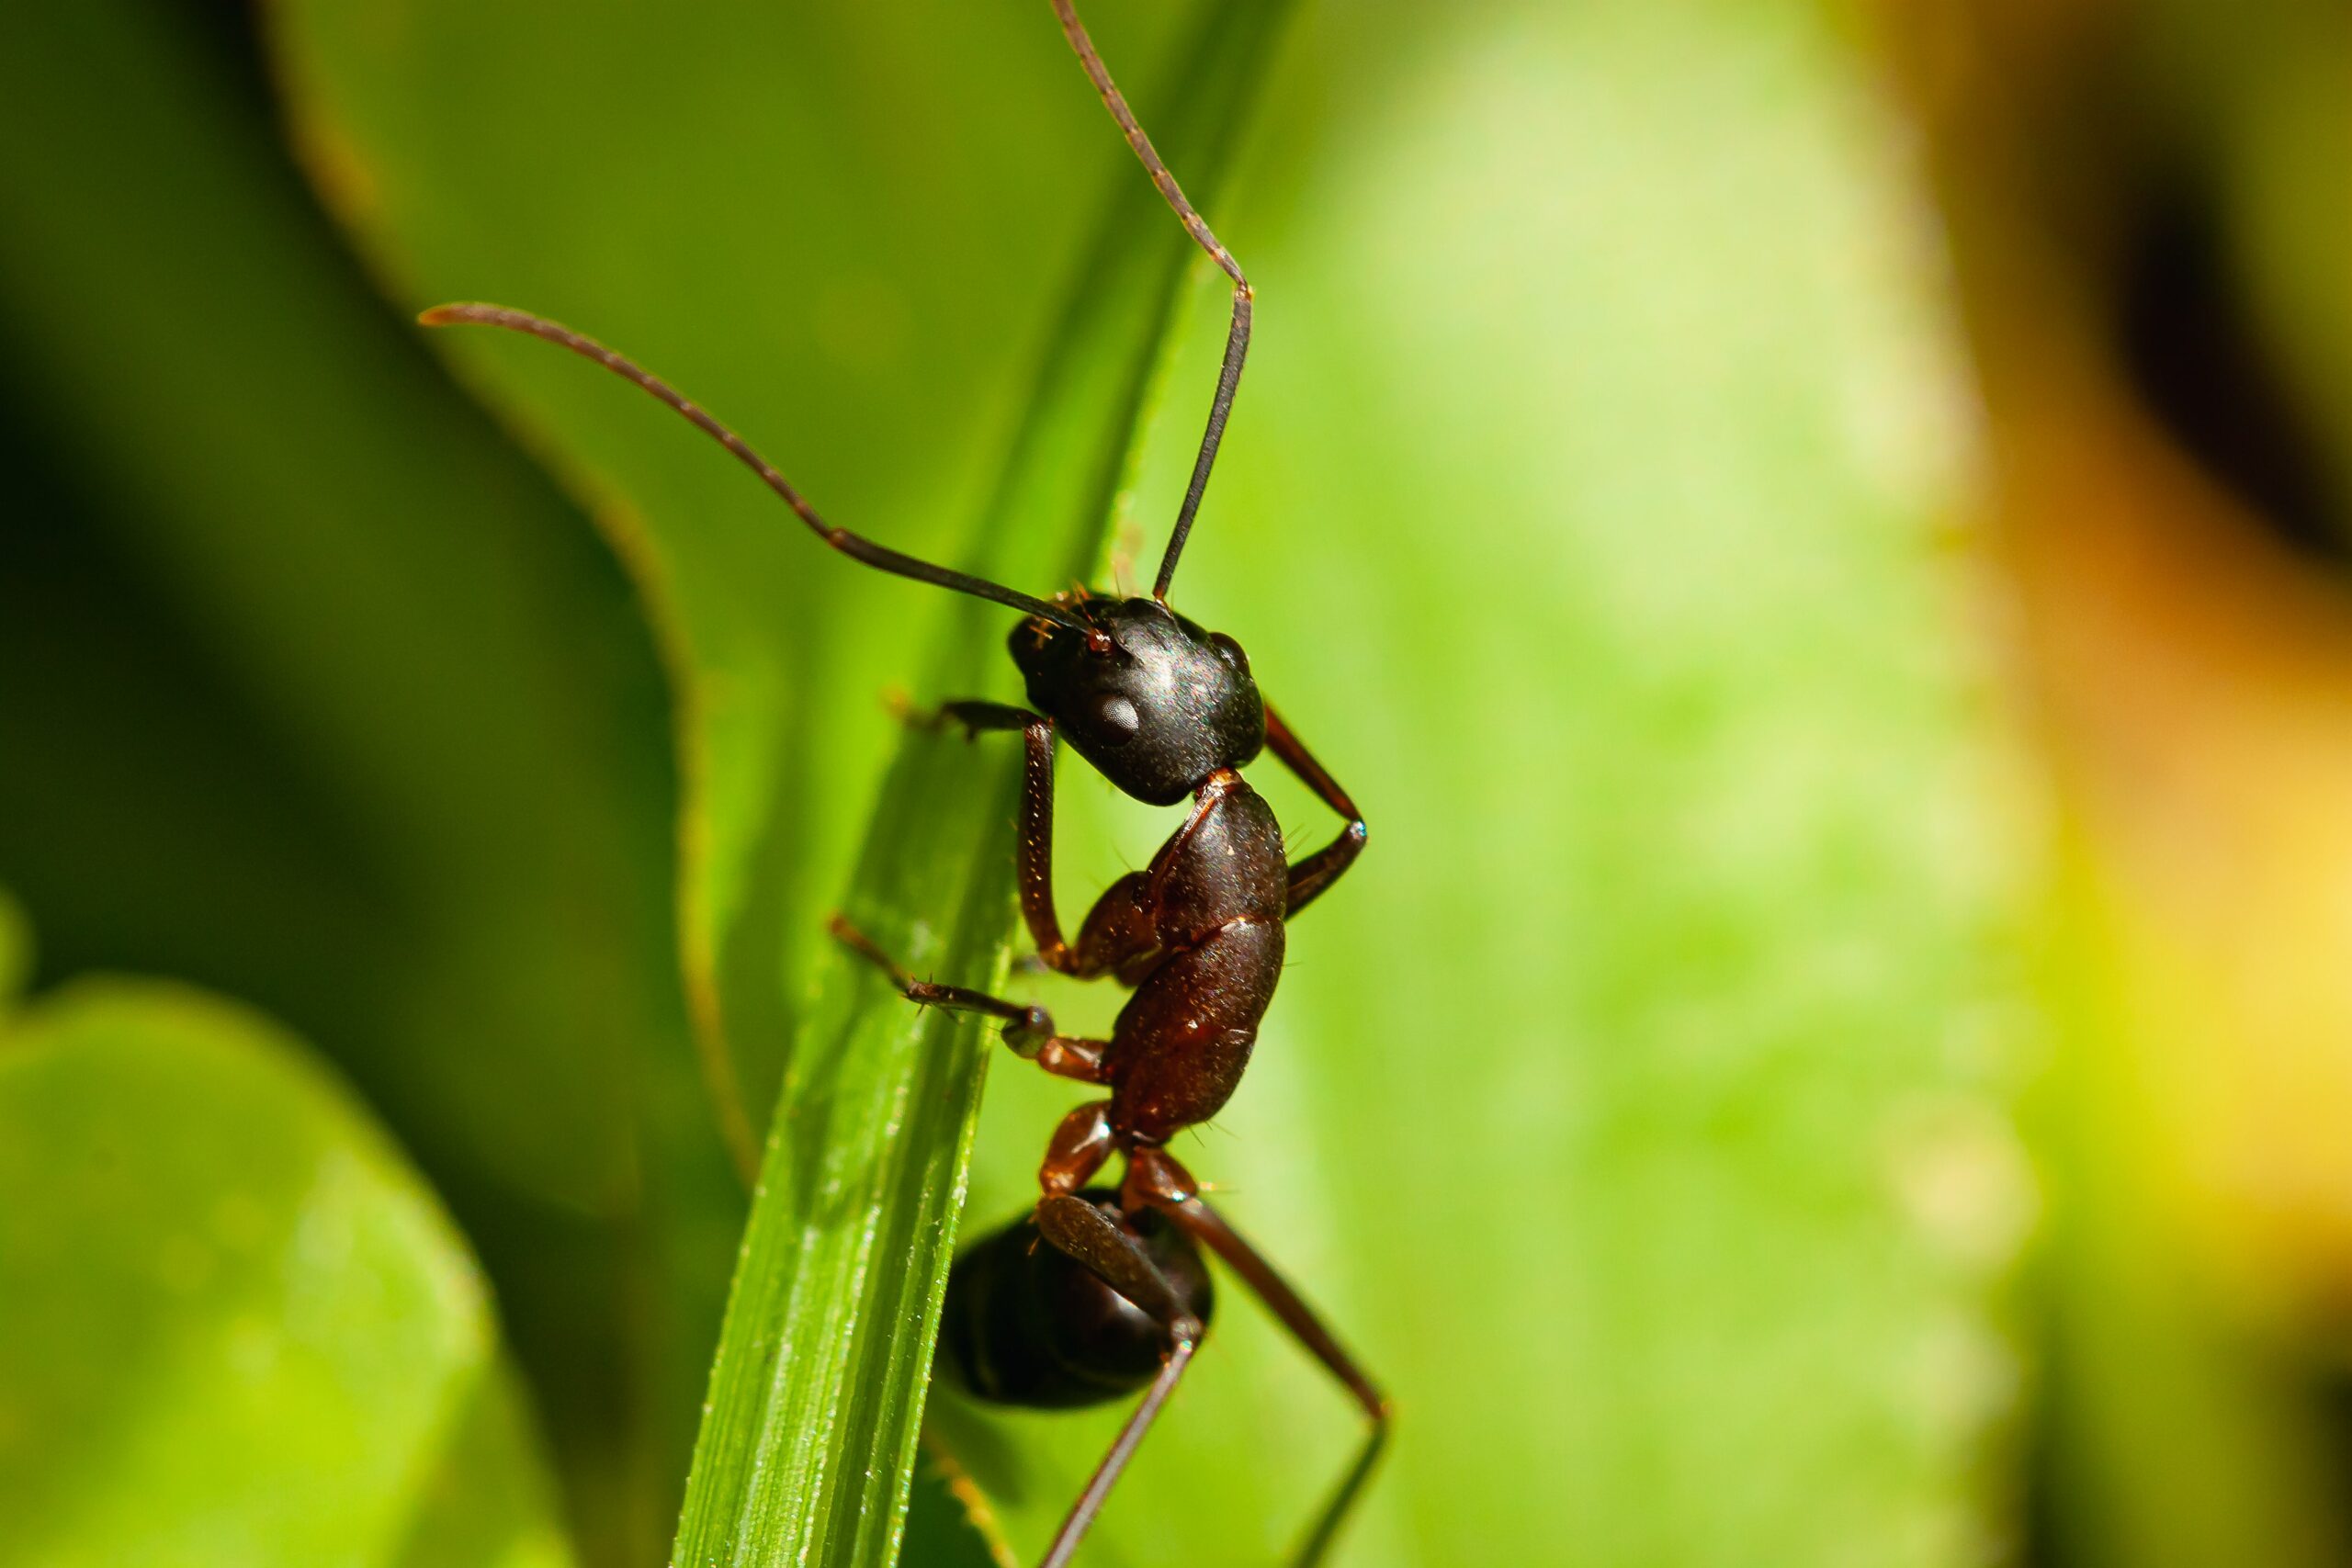 black-ant-climbing-on-a-green-grass-blade-in-the-m-min